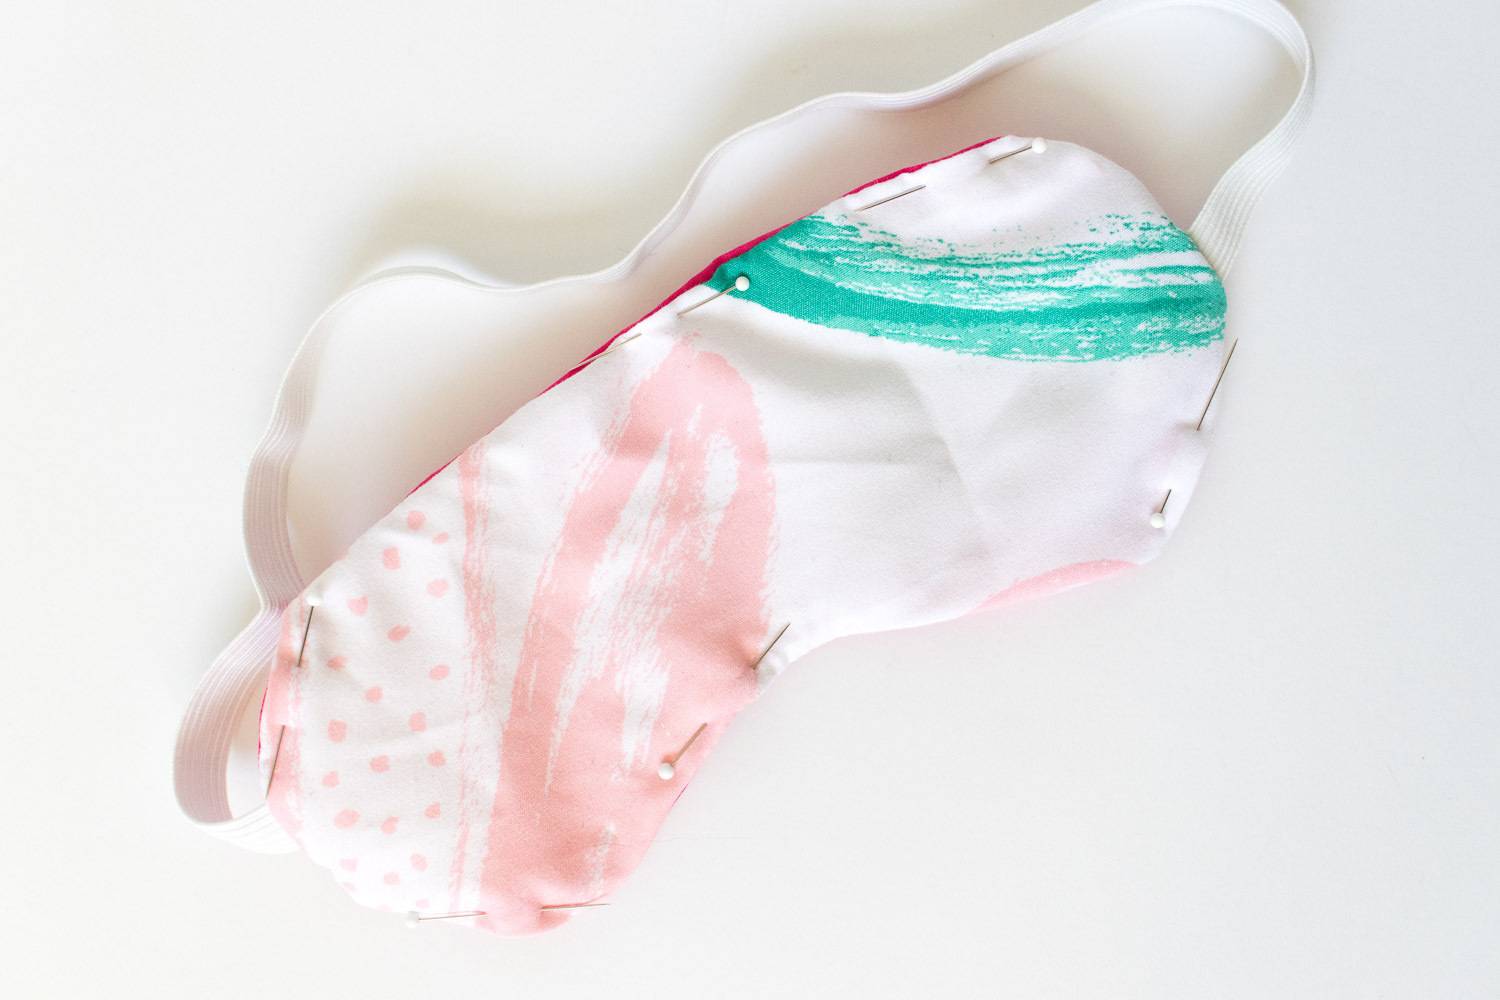 Cotton eye mask that has colors white, pink, and green with a elastic strap.